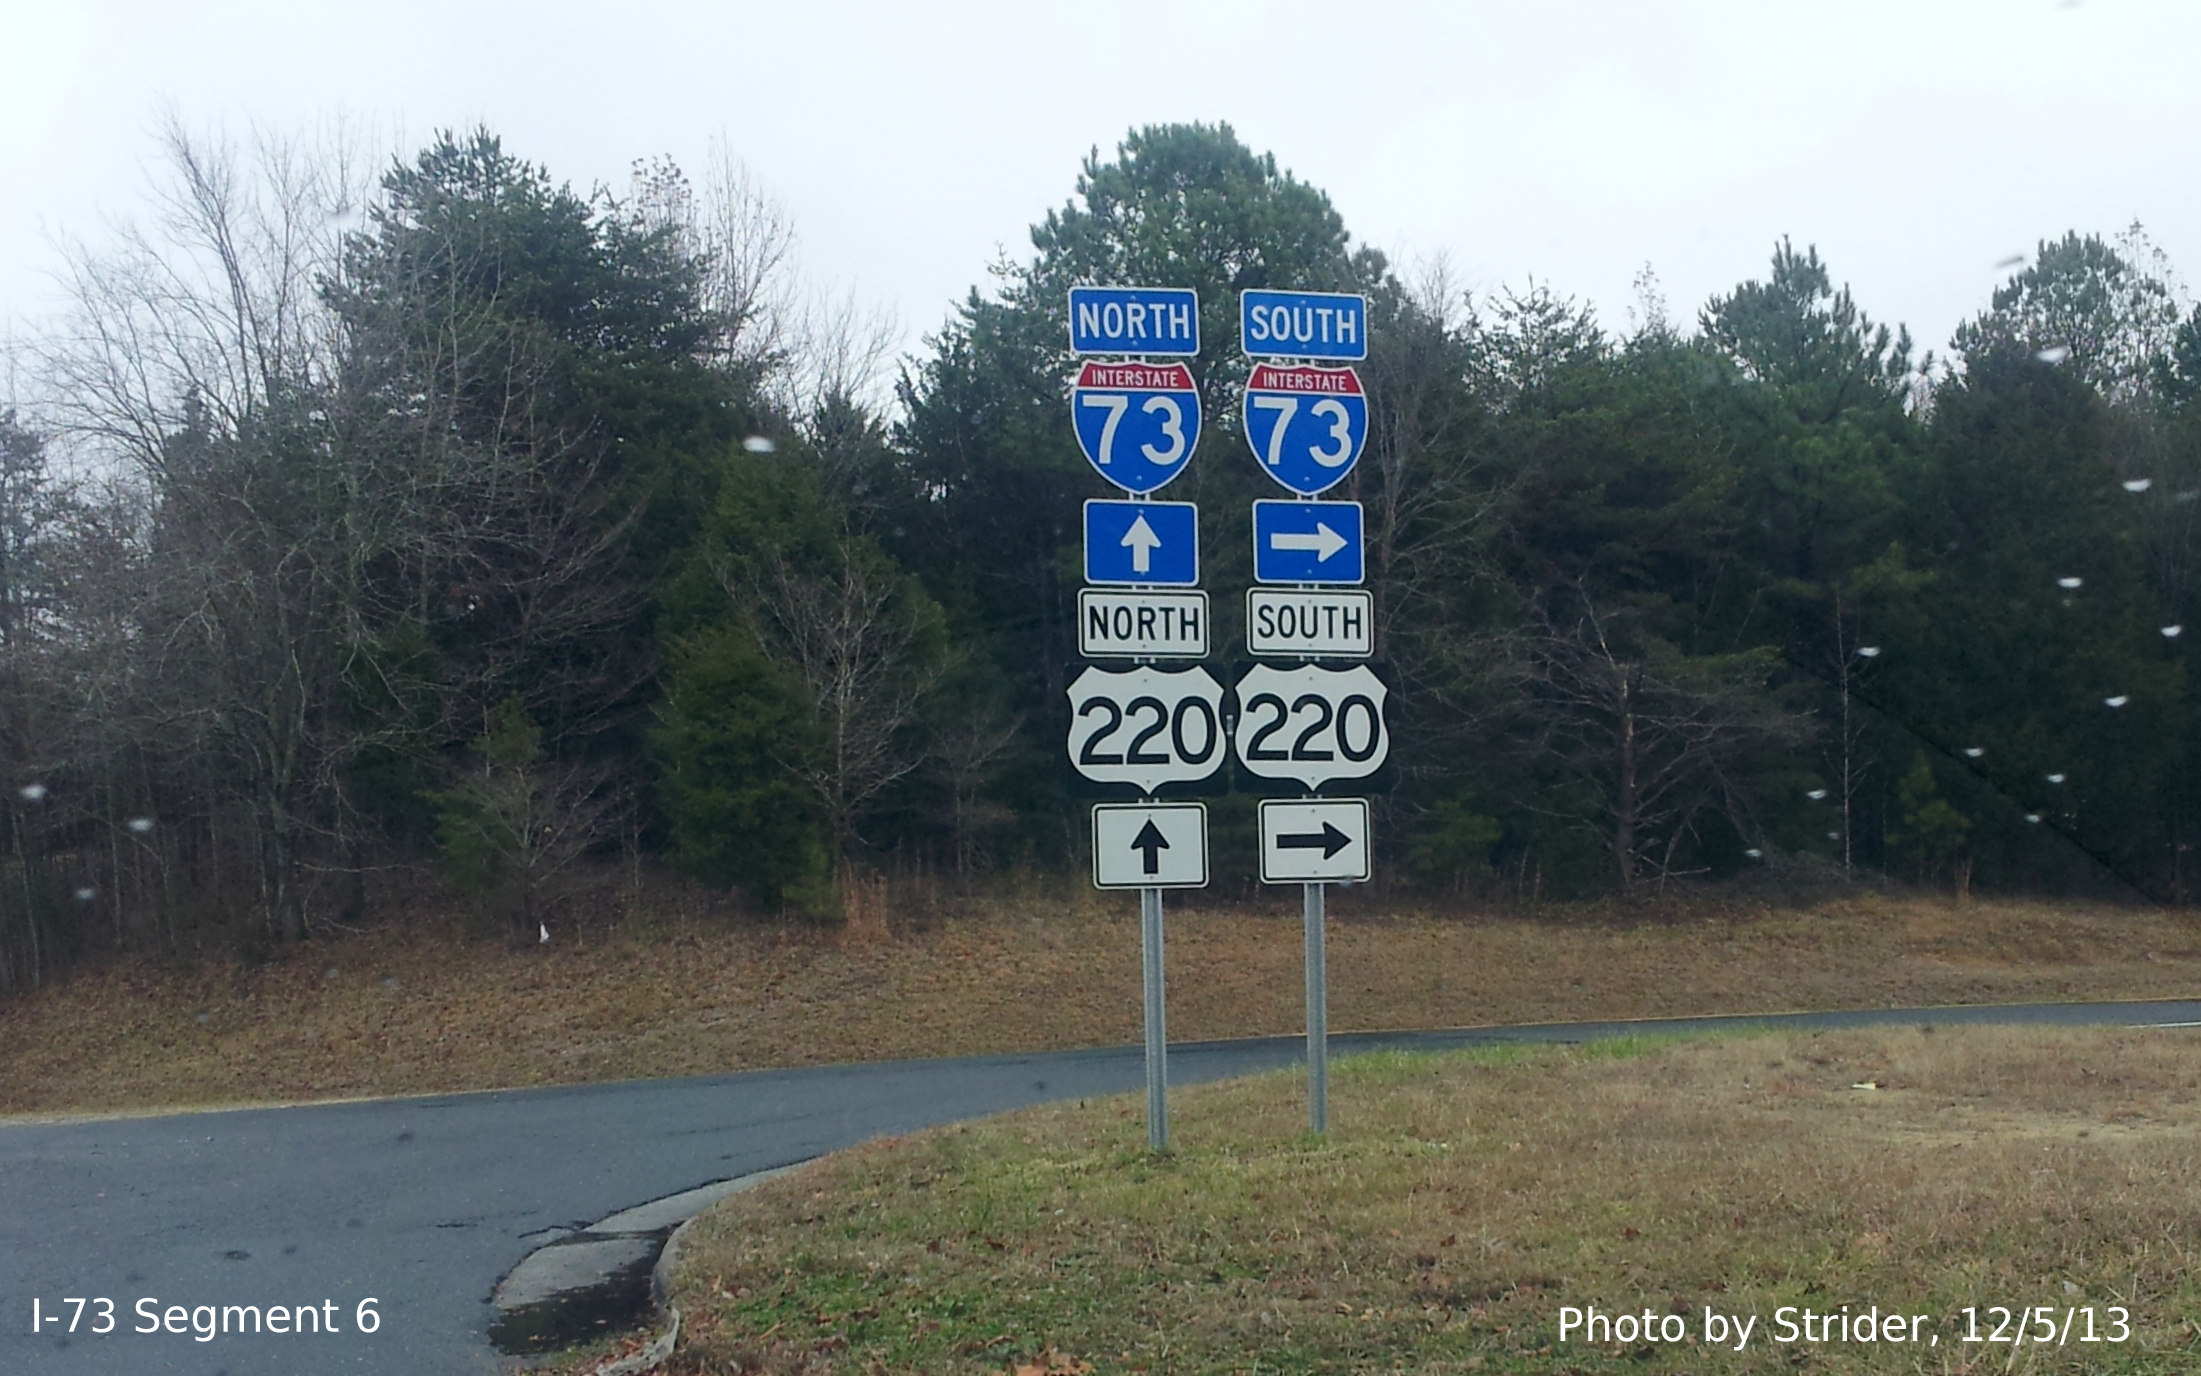 Photo of New I-73 and US 
220 shields at South on-ramp from Old Randleman Rd, Photo by Strider